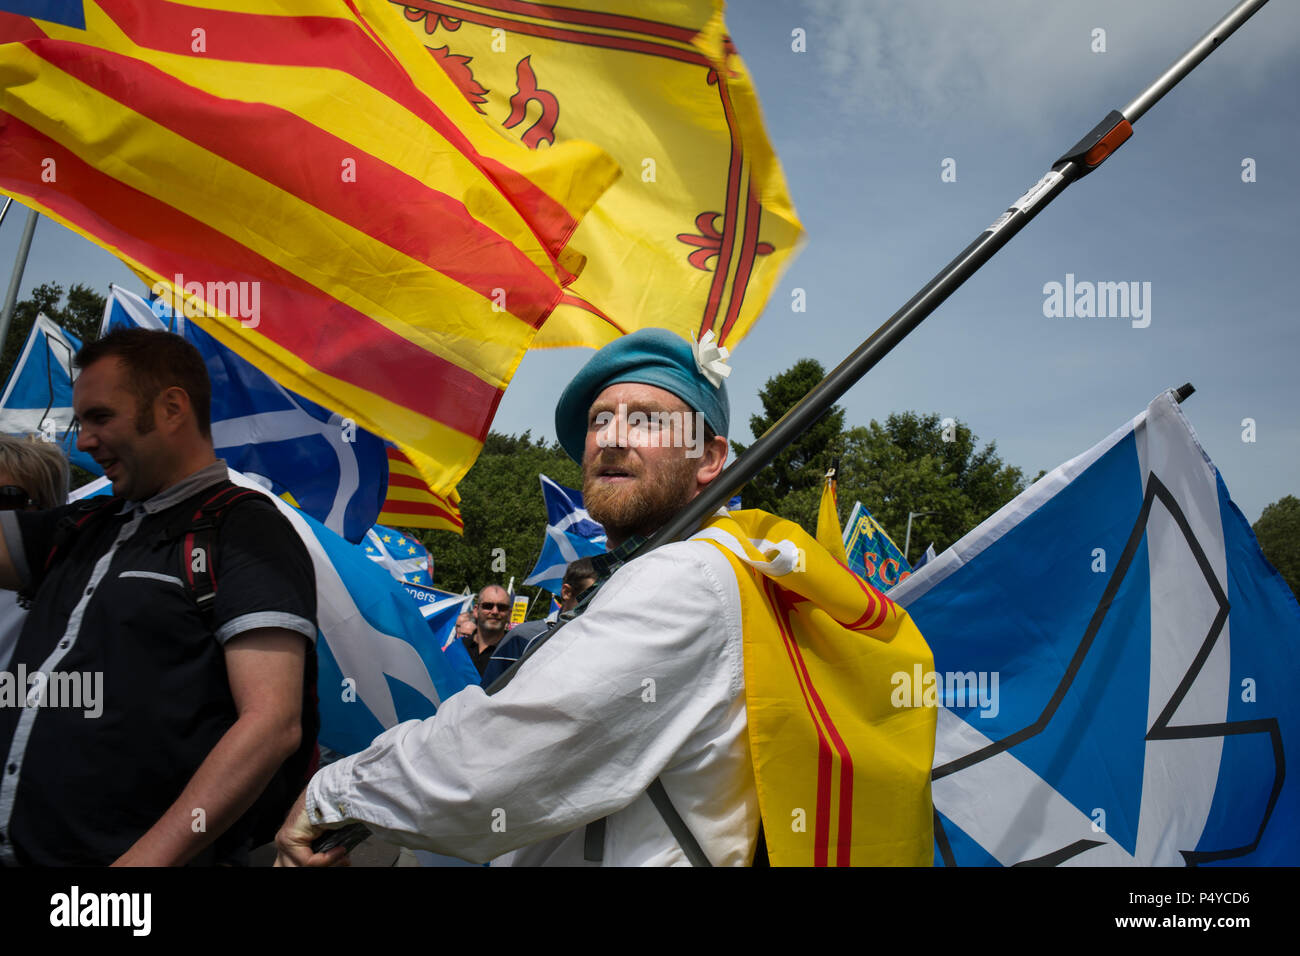 Stirling, Scotland, UK. 23rd June 2018.  Pro-Scottish Independence march, organised in the 'All Under One Banner' name, through the streets and to the battlefield in Bannockburn on the 704th anniverary of the Battle of Bannockburn. It was estimated that 10,000 people took part in the march calling for a second independence referendum. Photo credit Jeremy Sutton-Hibbert/Alamy Live News. Stock Photo